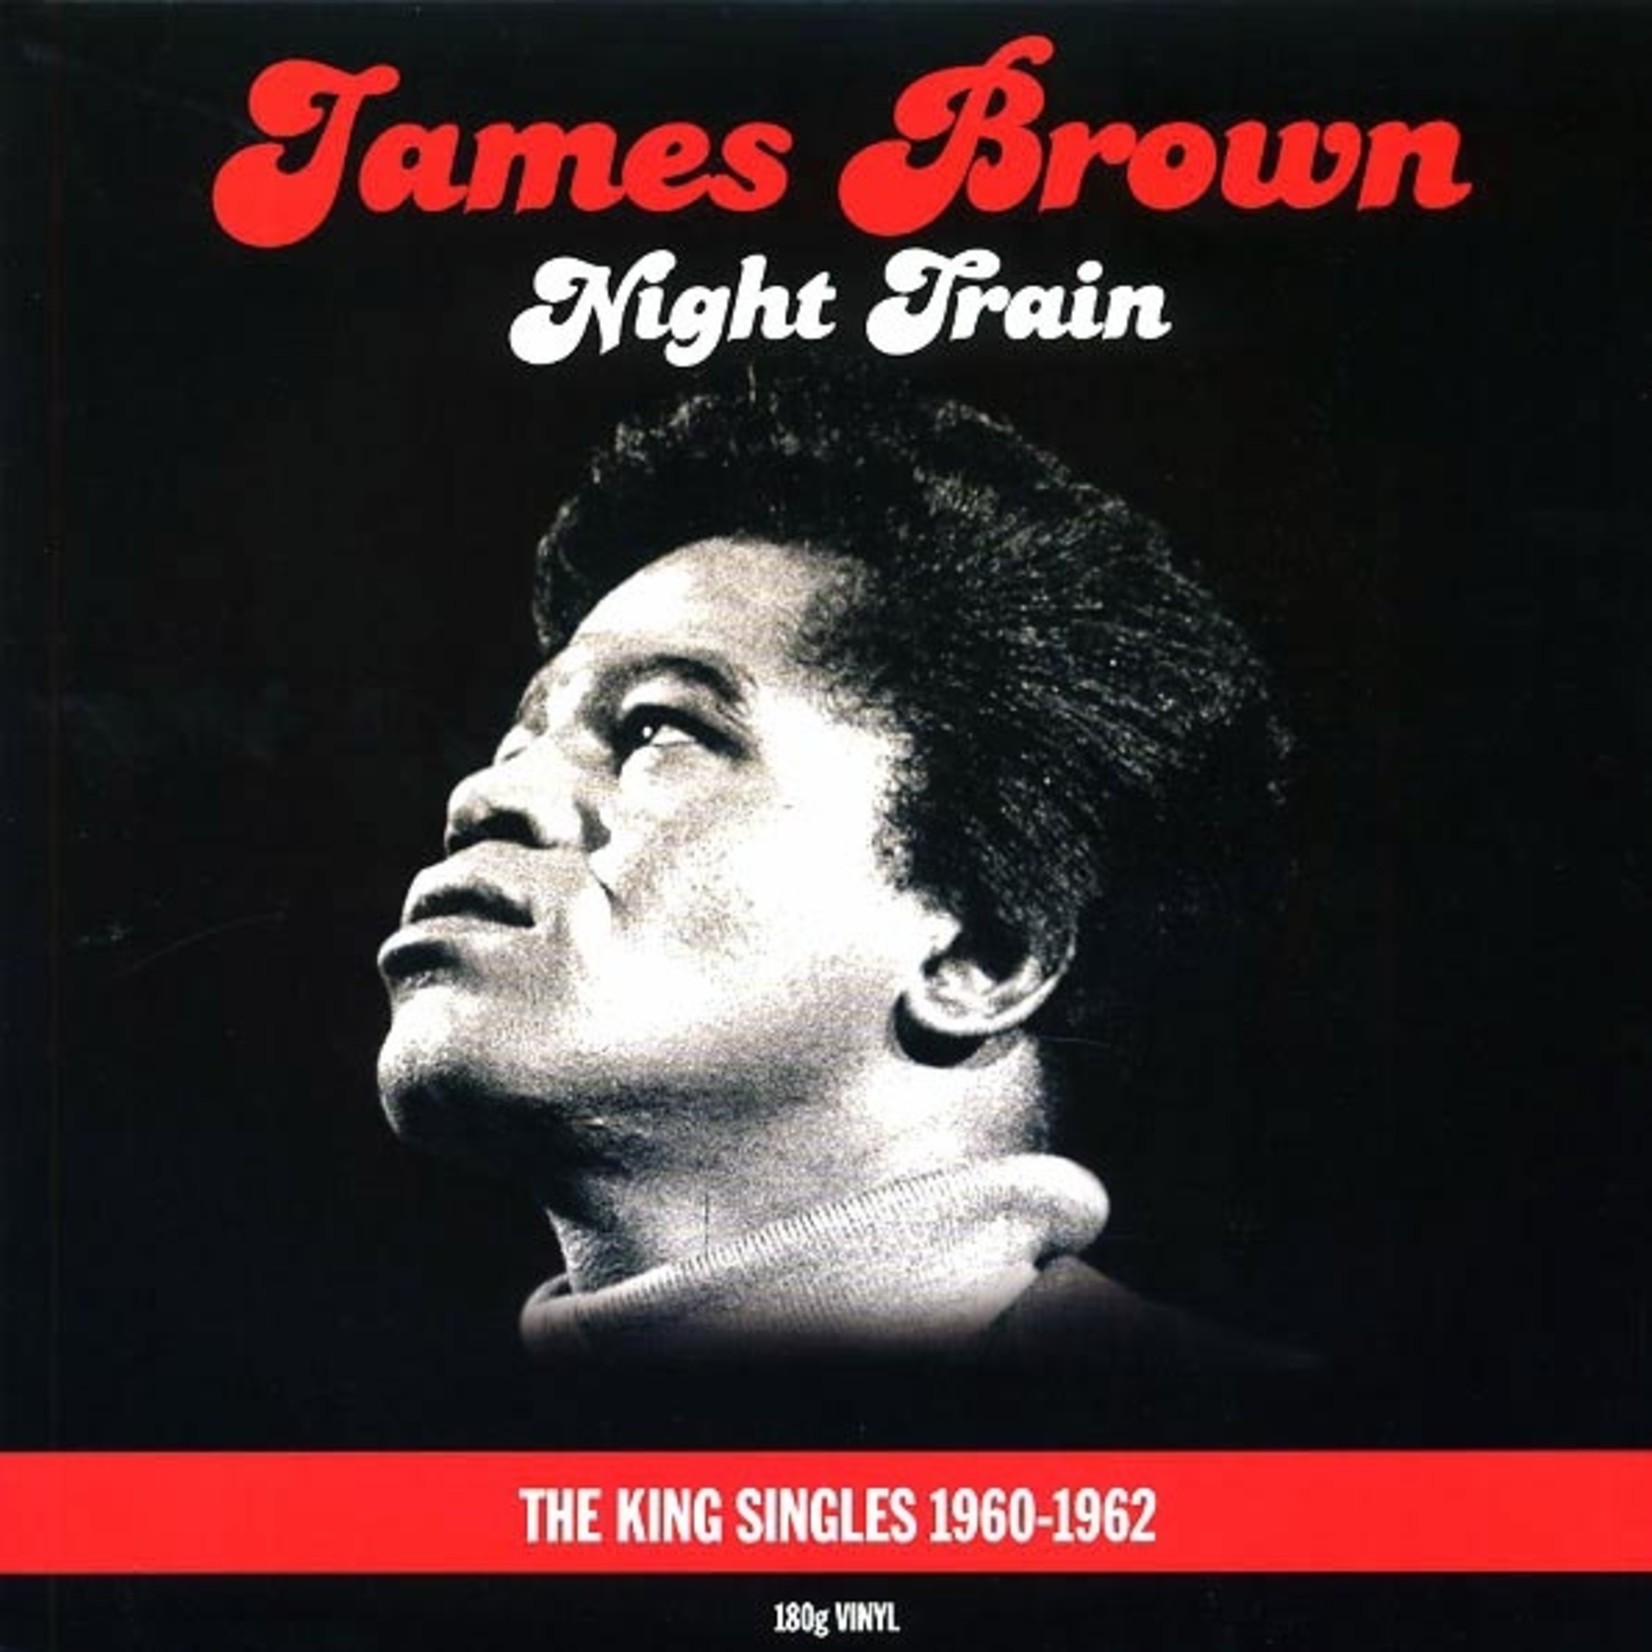 James Brown - Night Train: The King Singles 1960-1962 (Not Now Music) (2xLP) (180g)